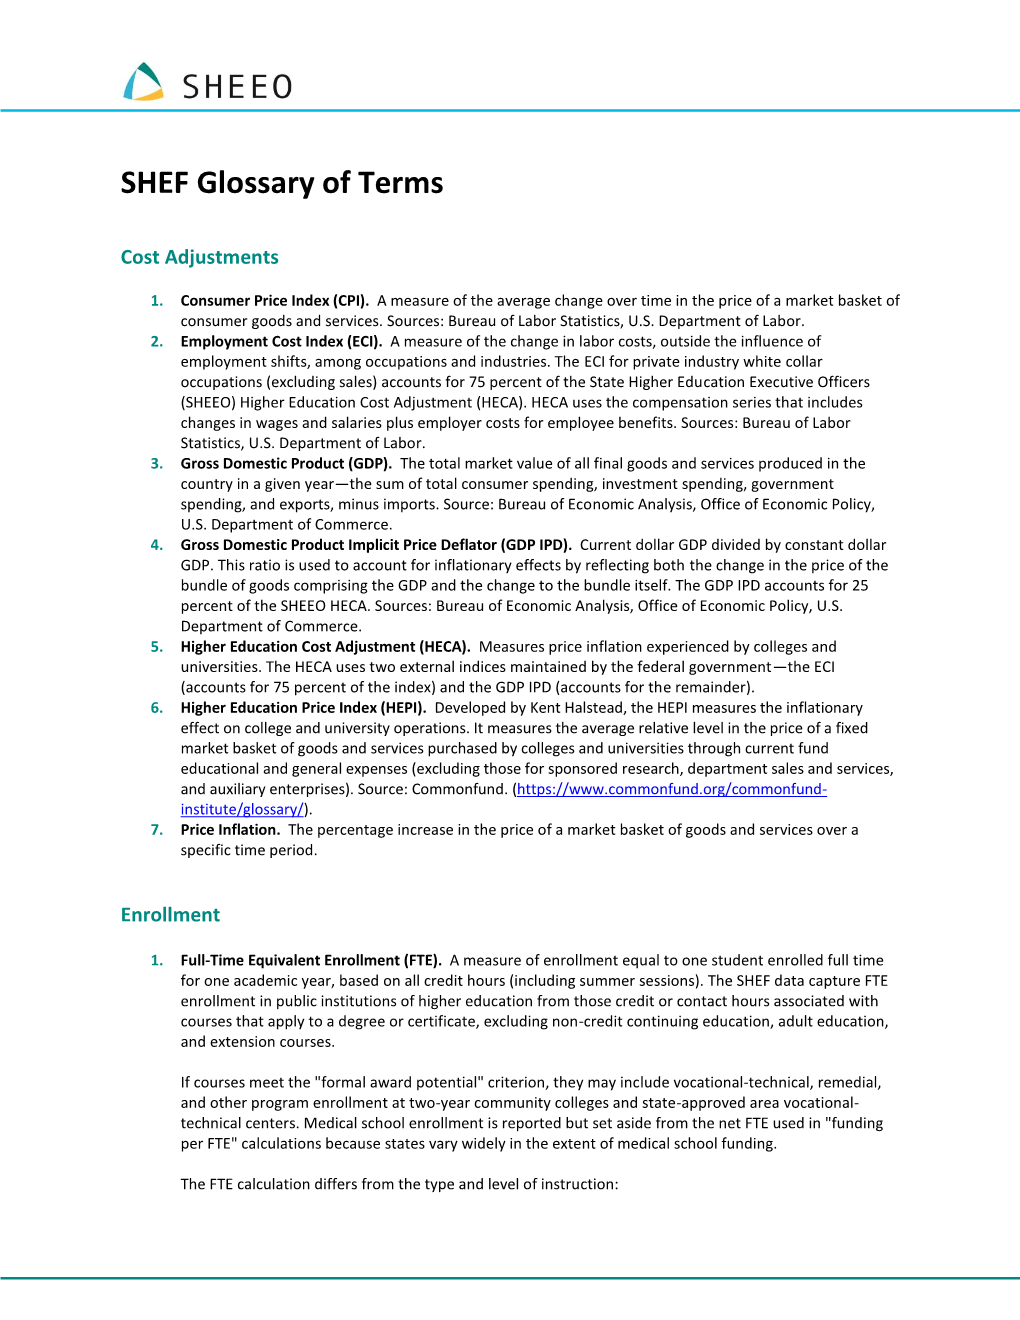 SHEF Glossary of Terms